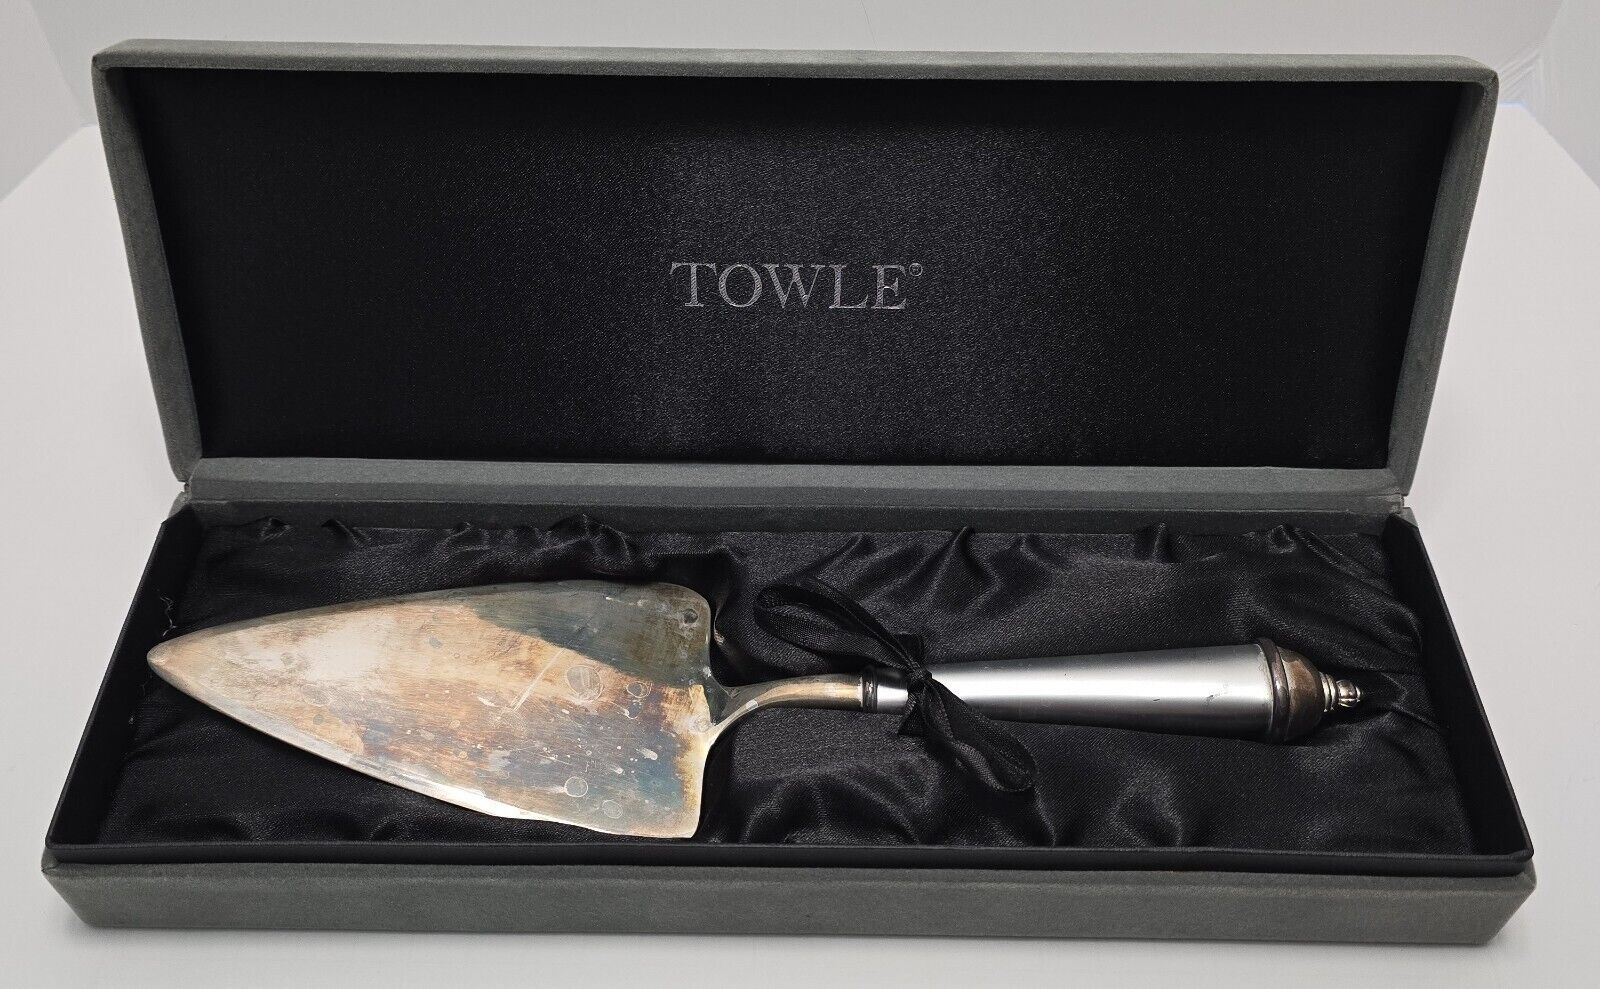 Towle Silverplate Pie Cake Dessert Server Boxed Vintage Wear Silver Plate 11.25\